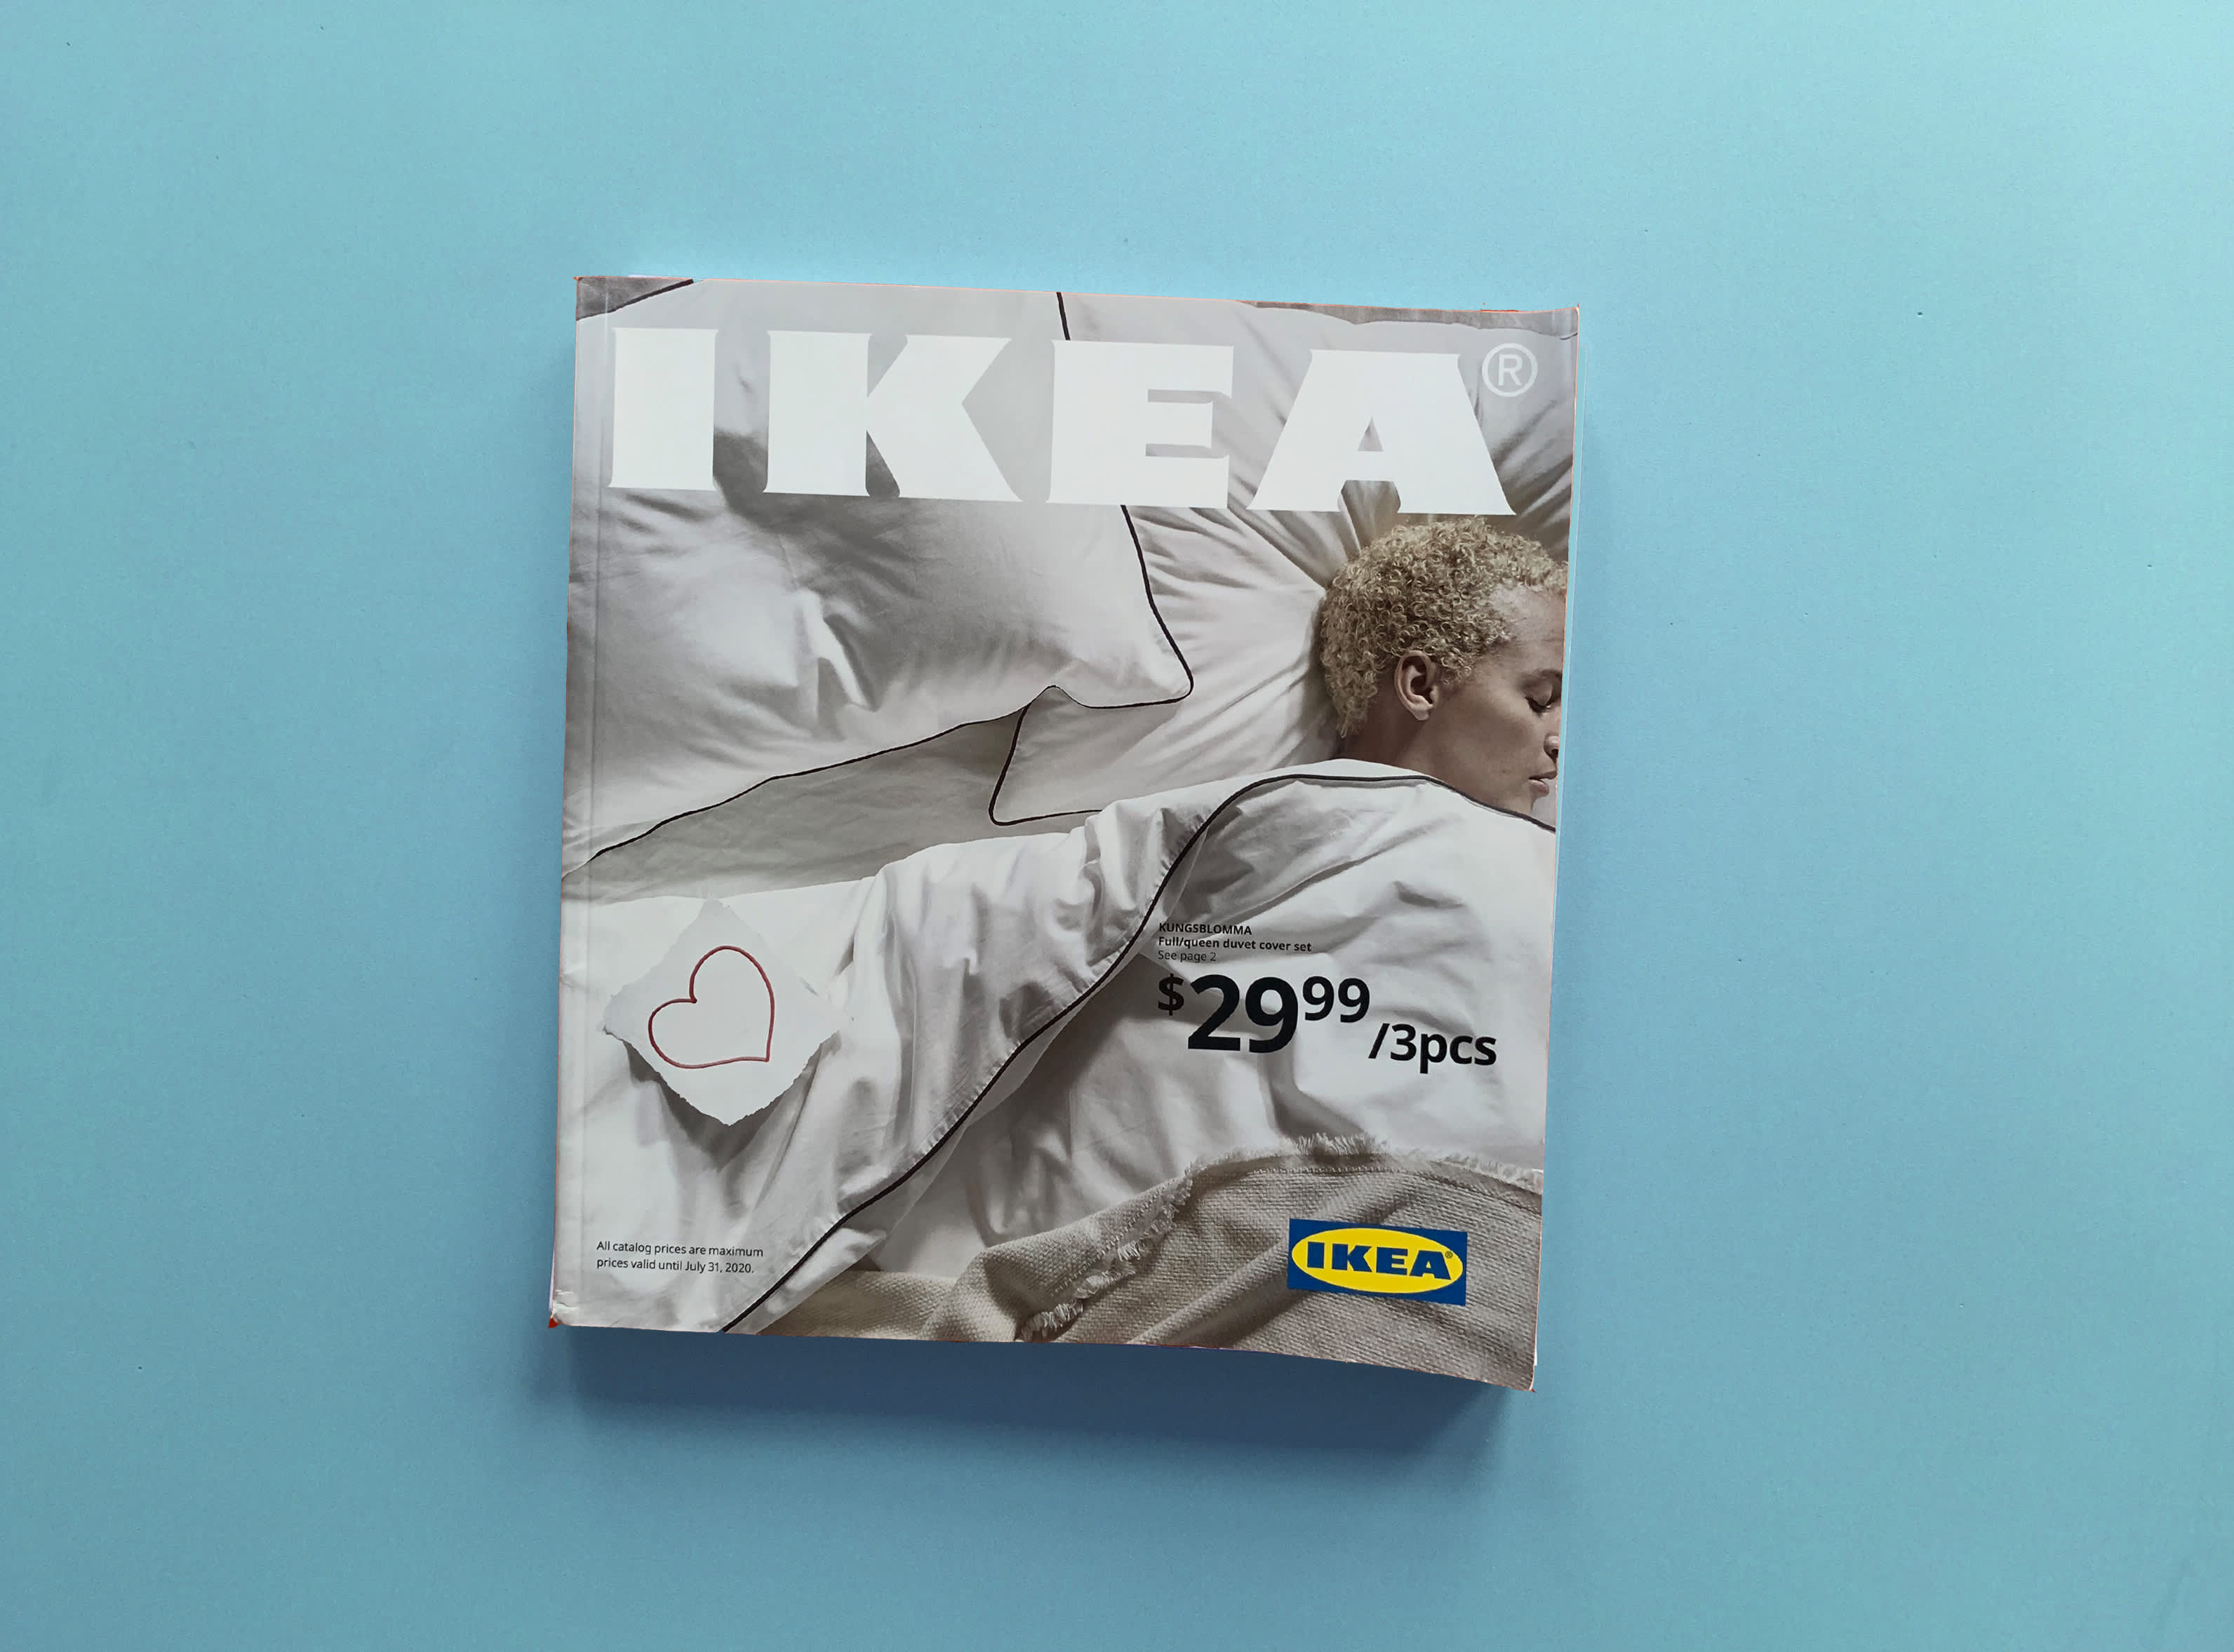 Ikea 2020 Catalog Best New Home Products Apartment Therapy